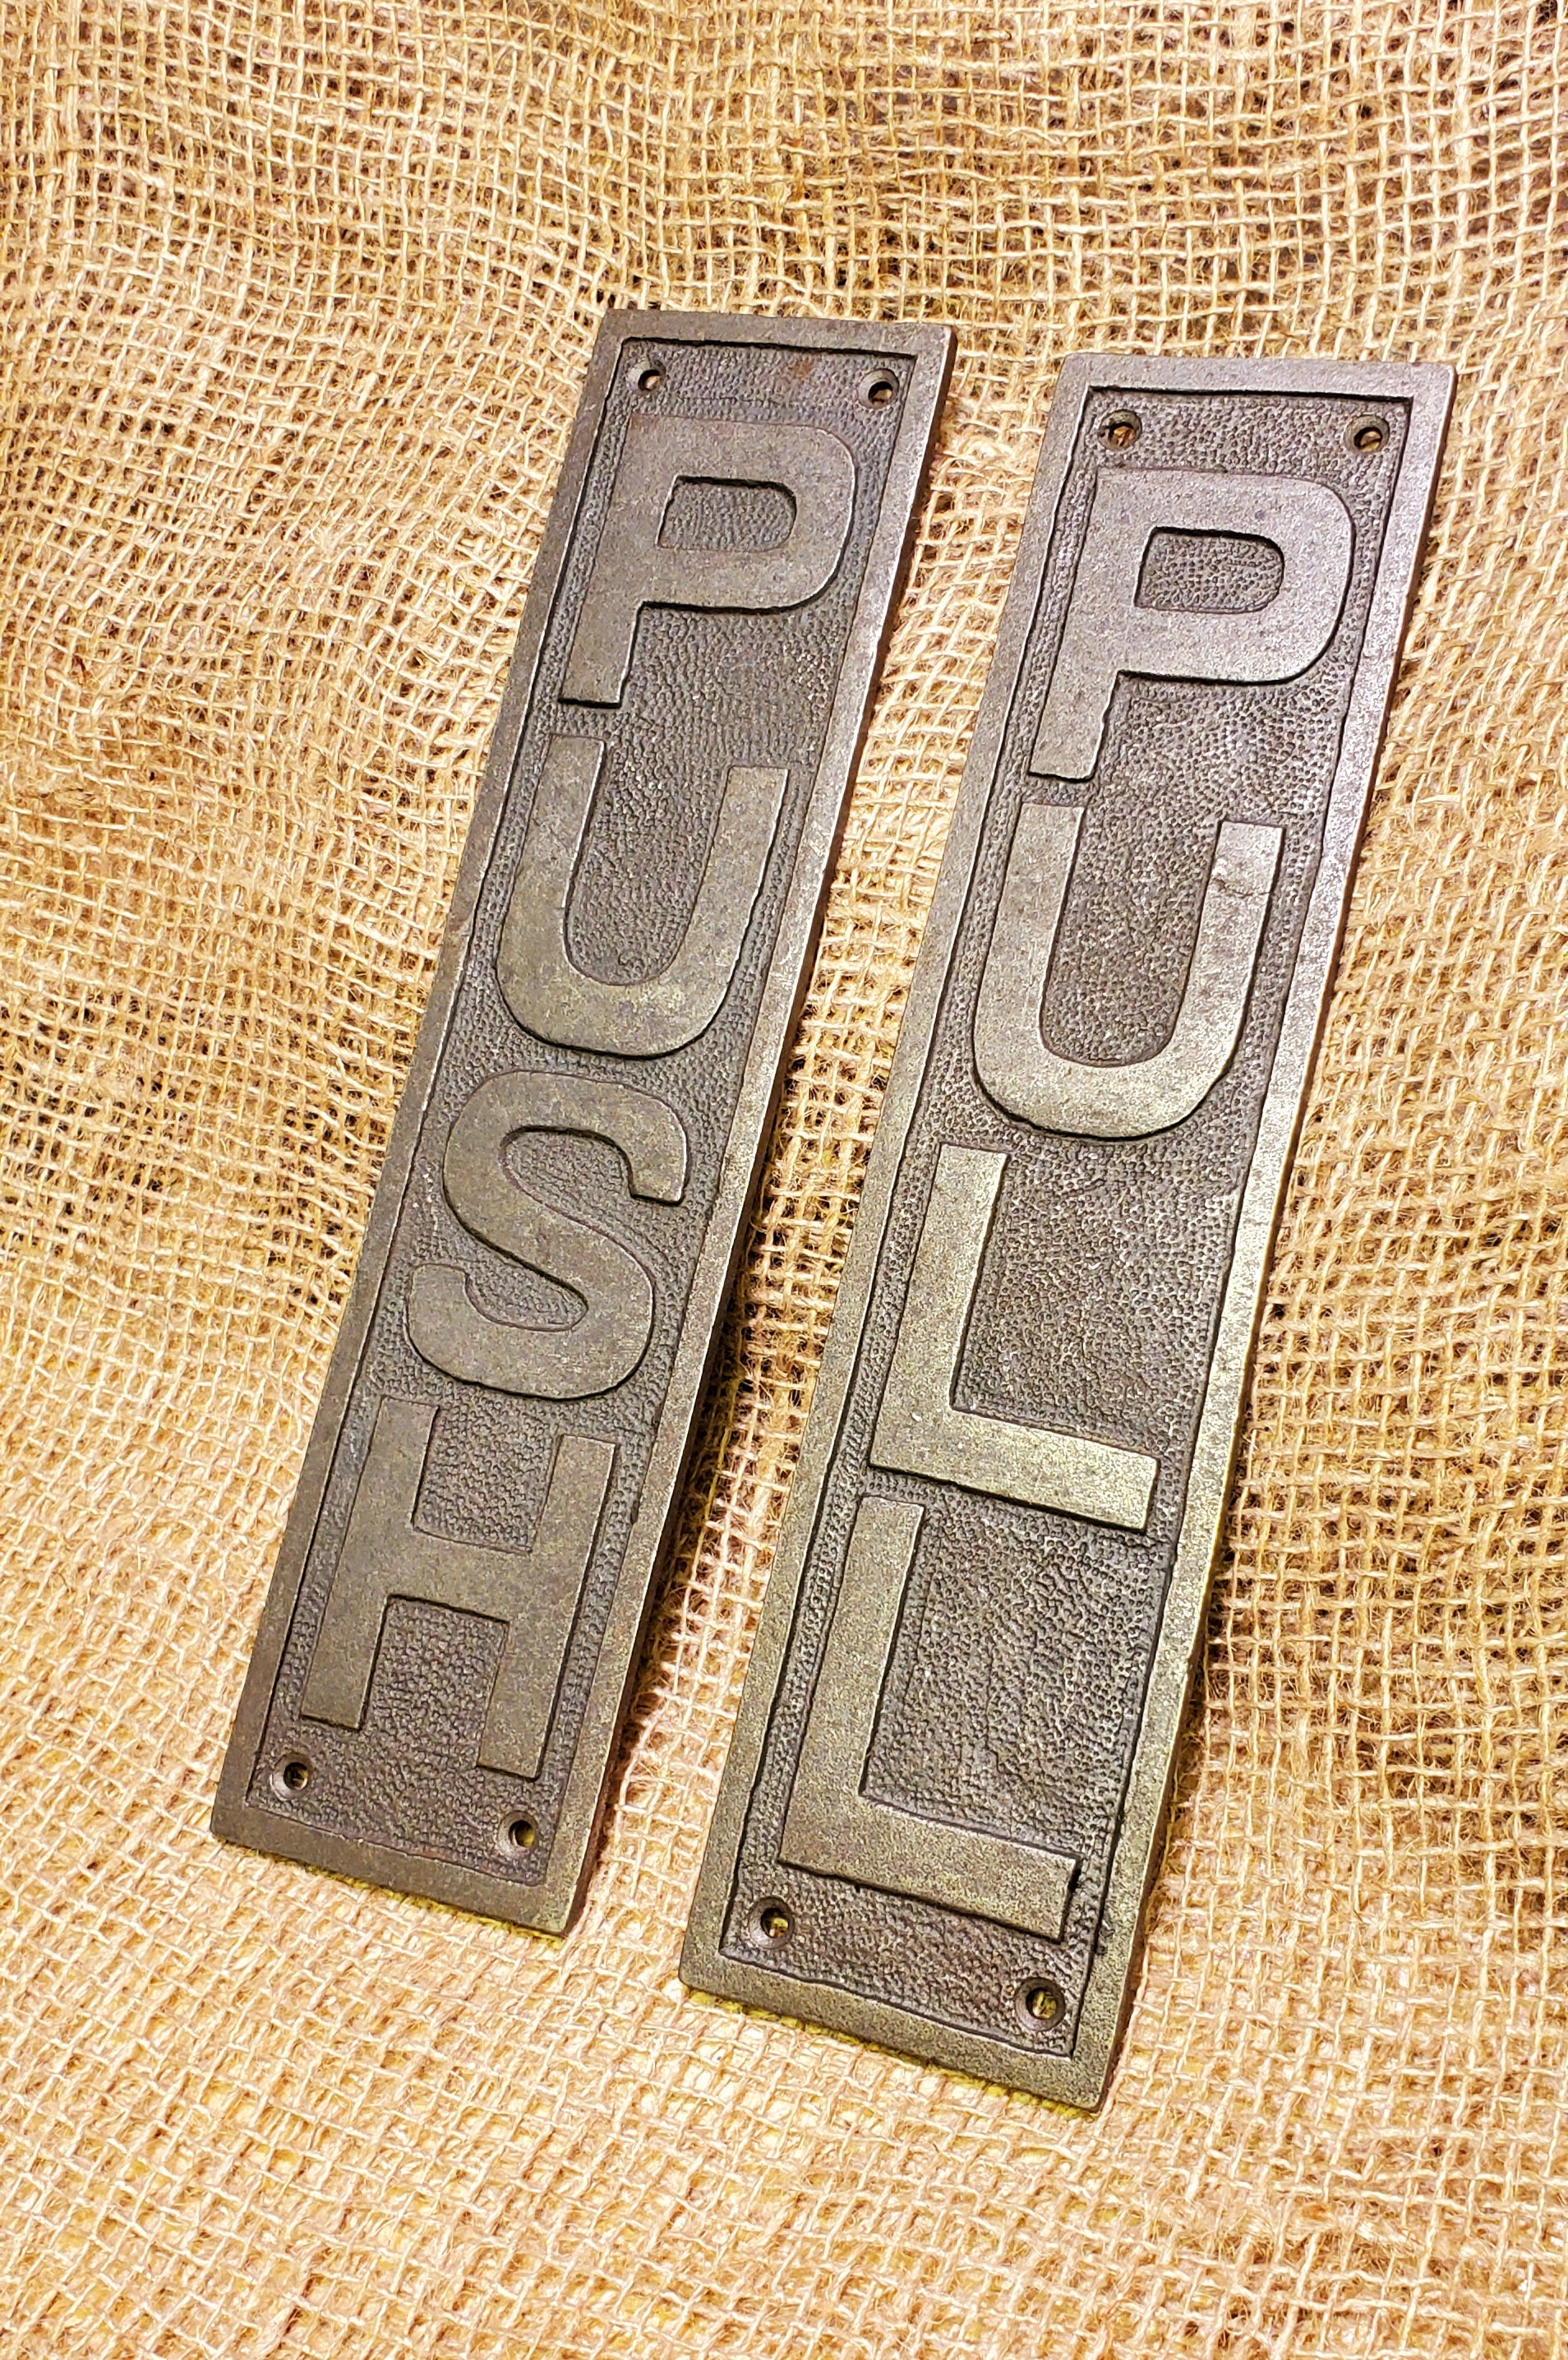 Door Push plate - PUSH - Spearhead Collection - Door & Gate Entryway Hardware - Door and Entry Way Accessories, Door Hardware, Hardware, Millwork Hardware, Plaques and Signs, Push Plates